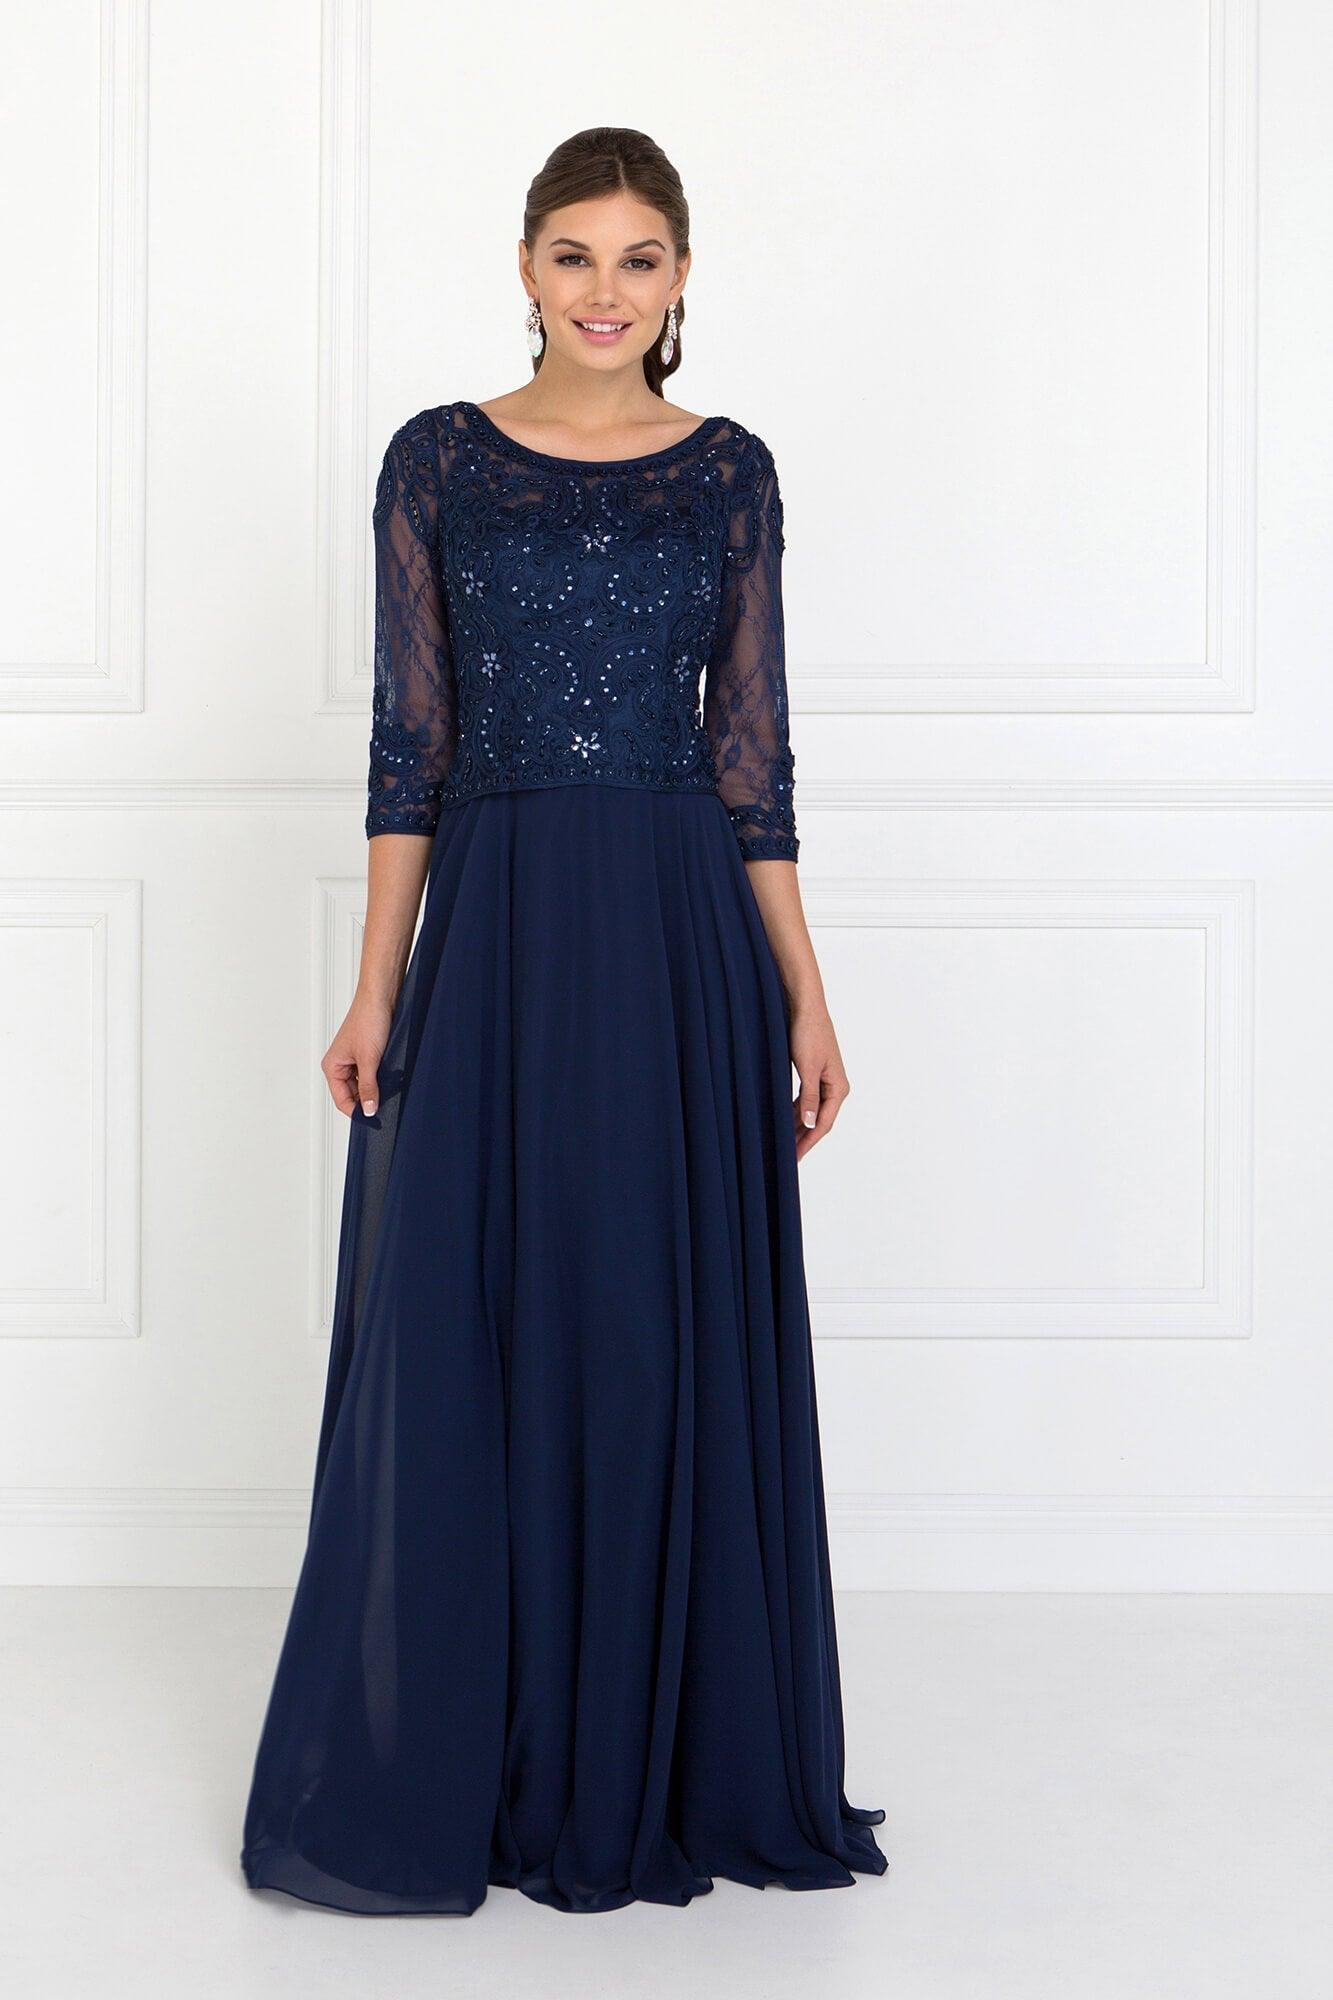 Chiffon Mother of the Bride Long Dress | Dress Outlet – The Dress Outlet